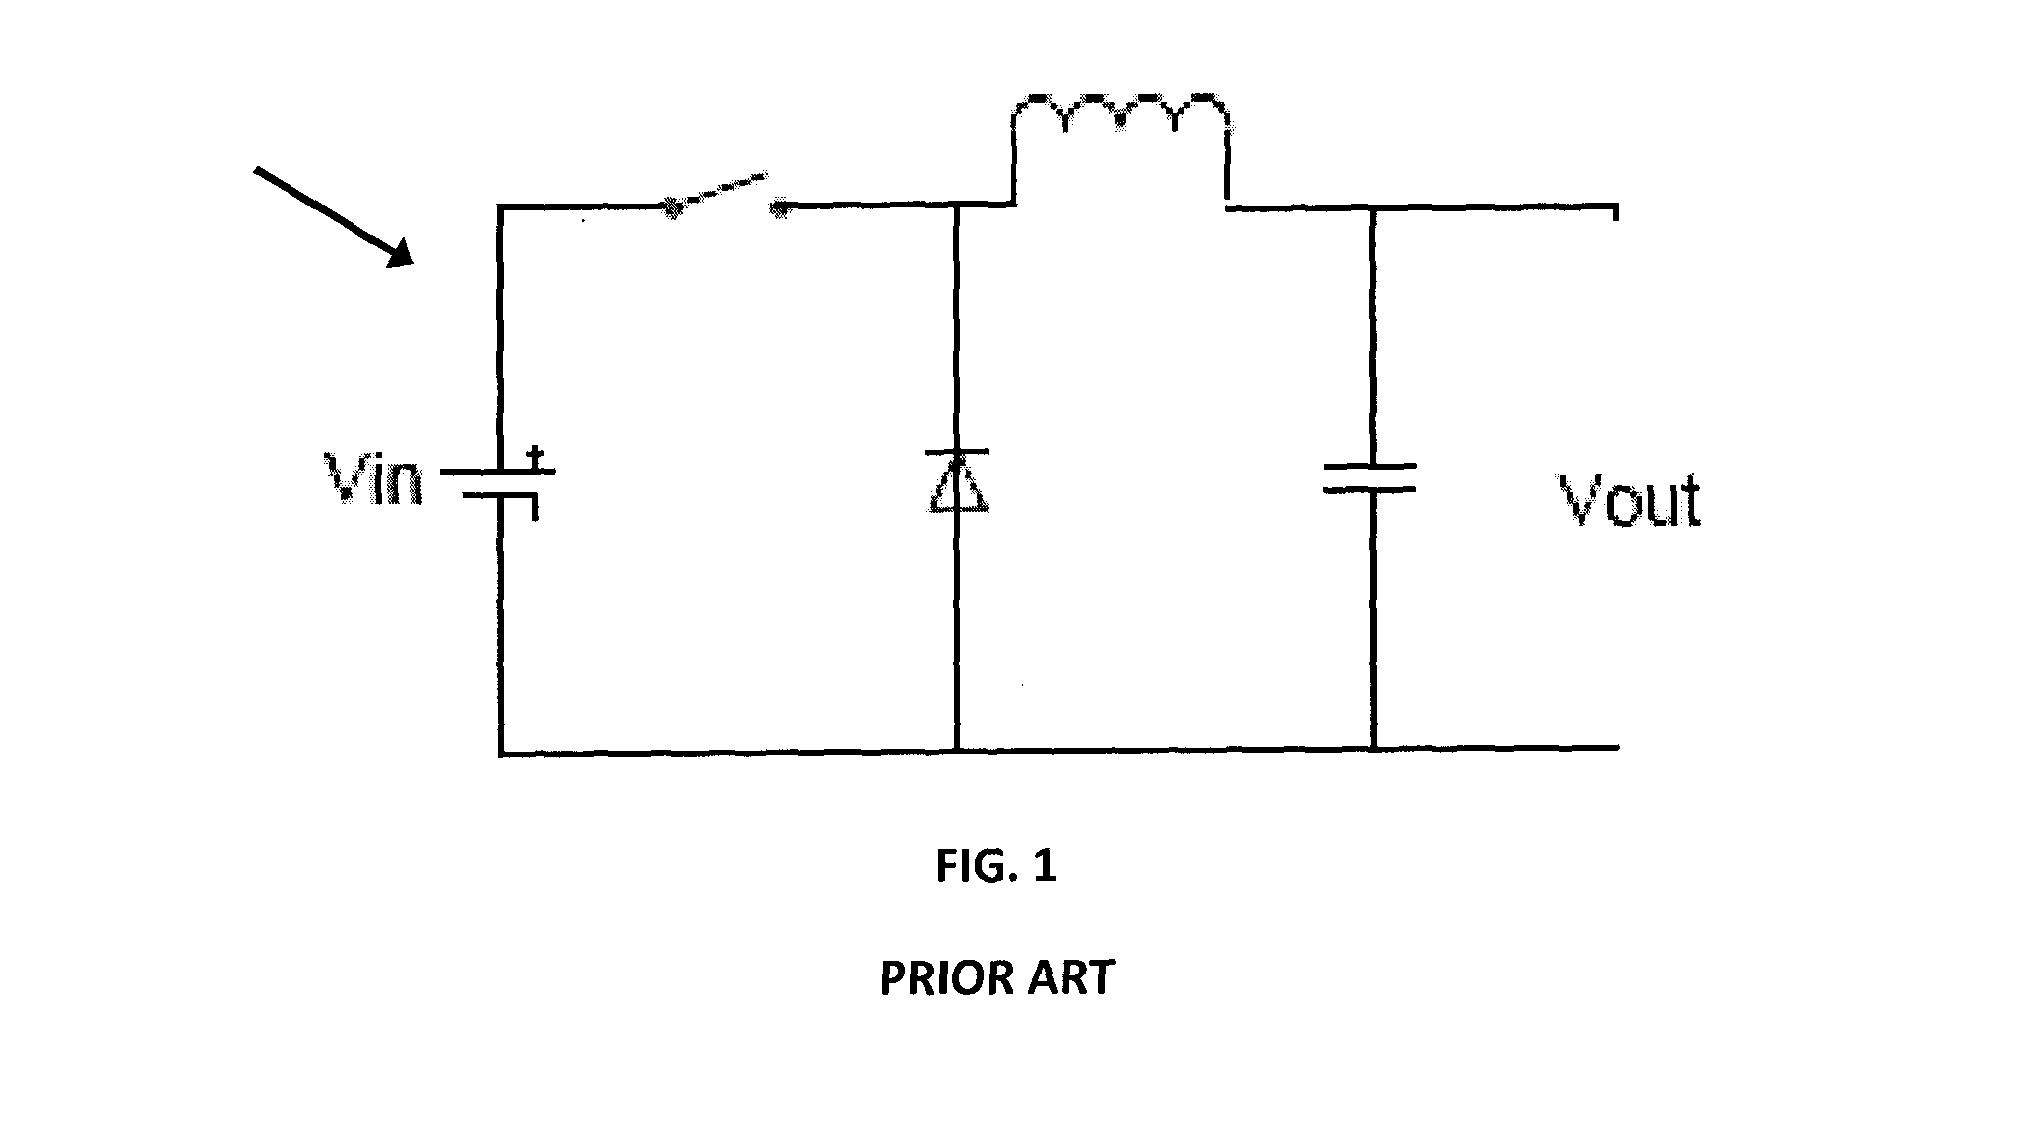 Dc-dc converter circuit using an llc circuit in the region of voltage gain above unity